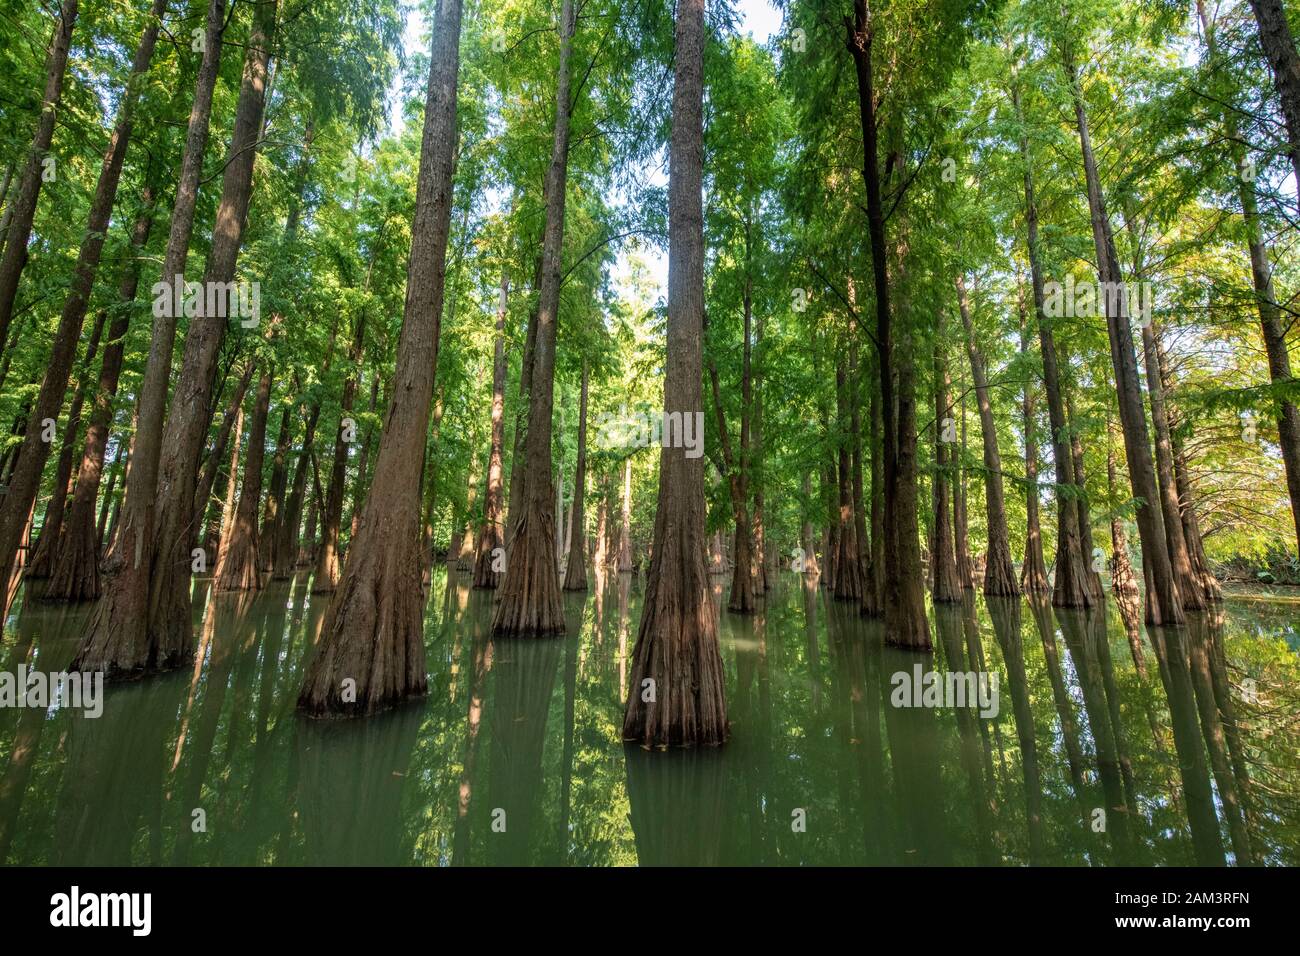 Taxodium distichum trees in the Seven-star Crags Scenic Area at Zhaoqing, China Stock Photo